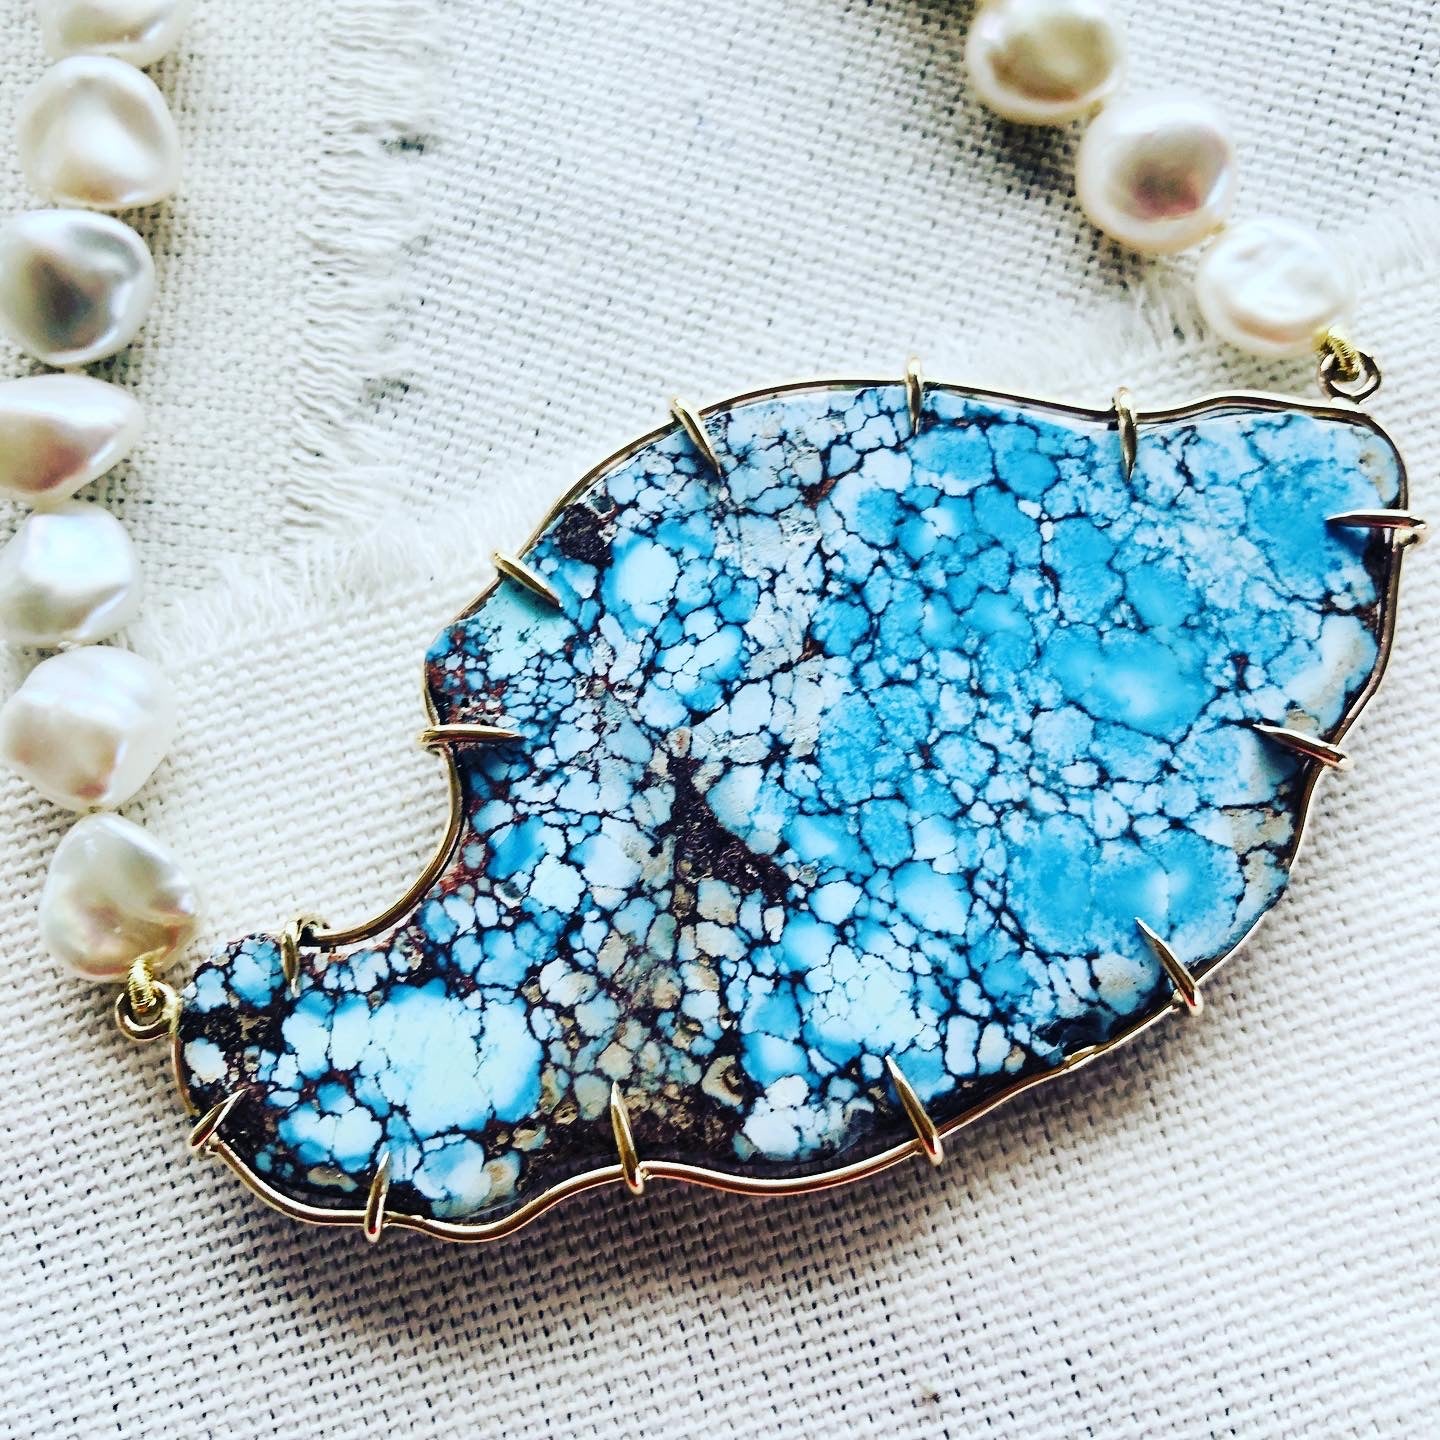 This Golden Hills turquoise slab reminds me of the map of maui. Let this beautiful Kazakhstan turquoise necklace compliment your beach holiday and be your souvenir from Hawaii. Effortlessly chic describes these Kazakhstan turquoise necklace best.